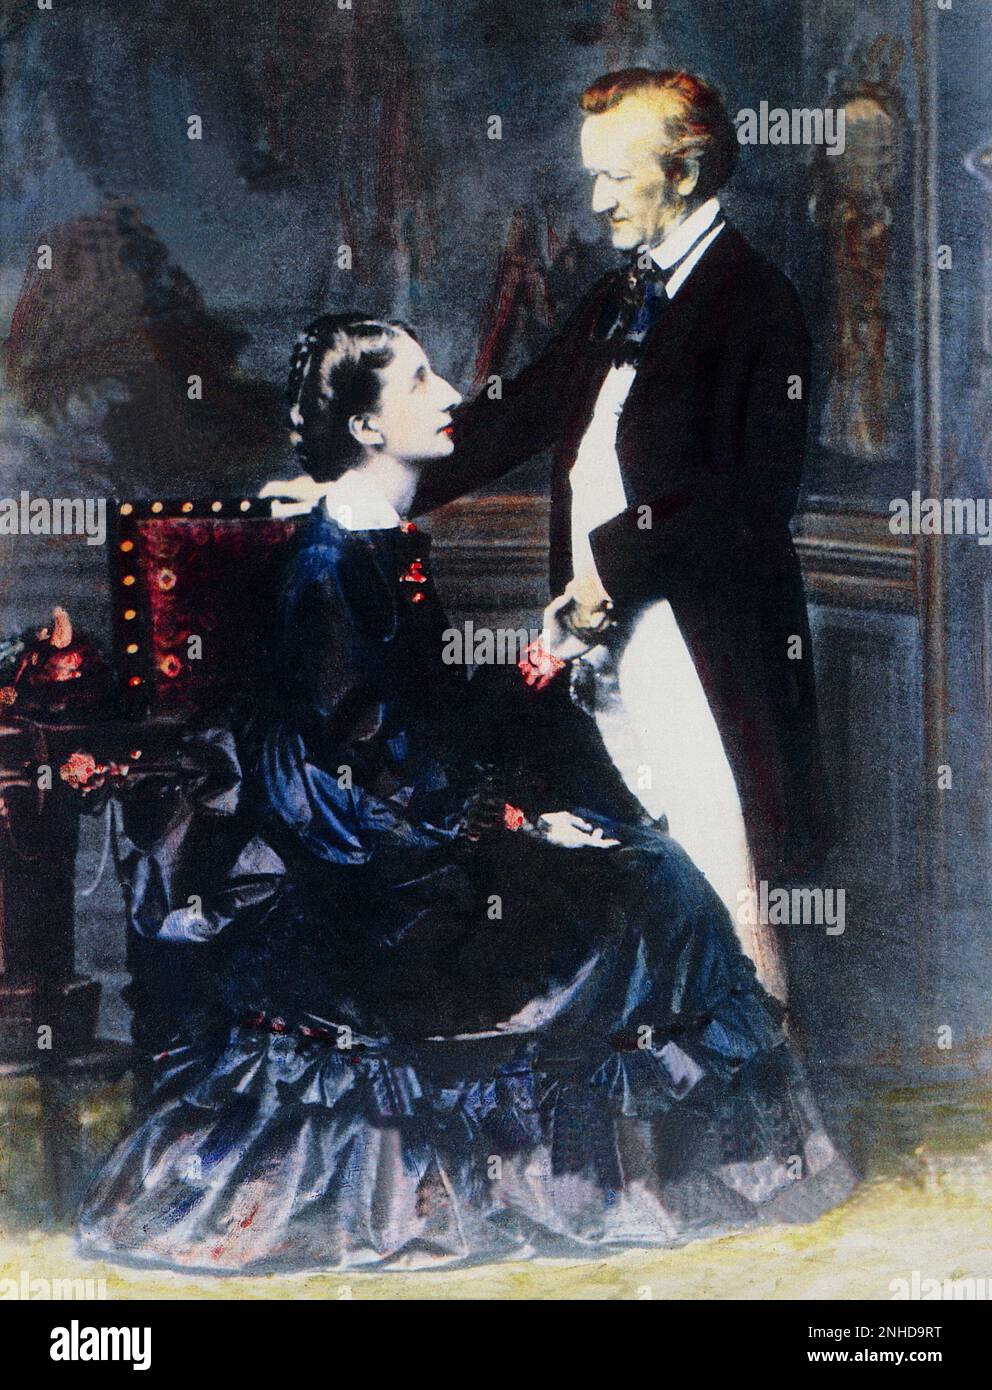 1872 : The german music composer RICHARD WAGNER ( 1813- 1883 ) with wife COSIMA WAGNER LISZT  ( daughter of music composer Franz Liszt and countess Marie de Flavigny d' Agout , 1837 - 1930 ), married with music conductor Hans Von Bulow , close friend of Wagner . Photo by Fritz Luckhardt   - MUSIC - CLASSICAL - MUSICA CLASSICA - LIRICA - OPERA - BAVARIA - BAVIERA - compositore - musicista - portrait - ritratto - profilo - profile - lovers - amanti  ----    Archivio GBB Stock Photo